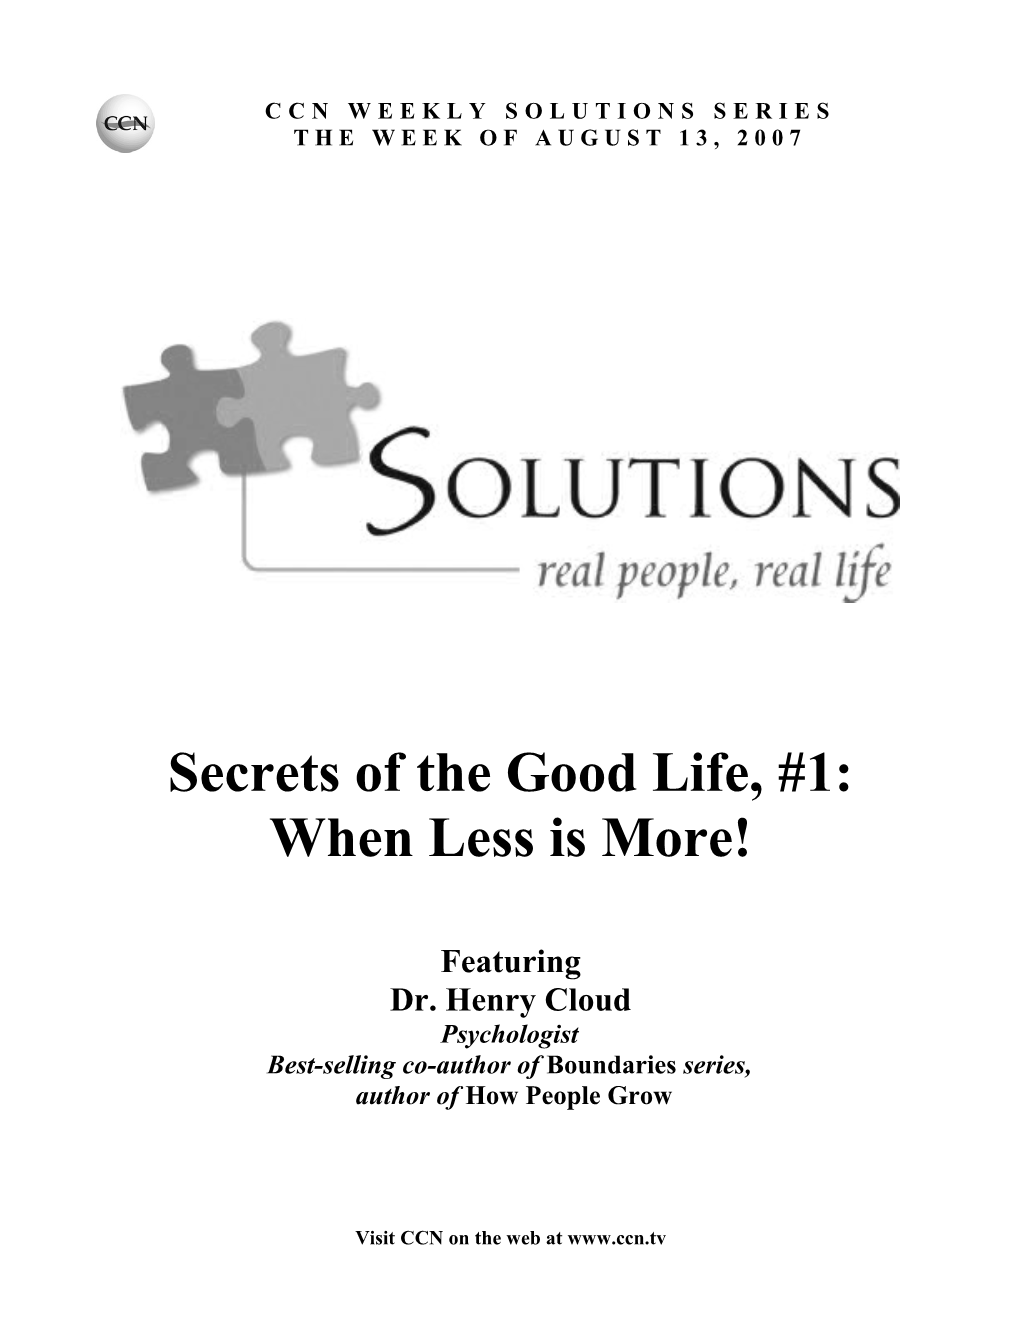 CCN Good Life 1: When Less Is More! Page 2